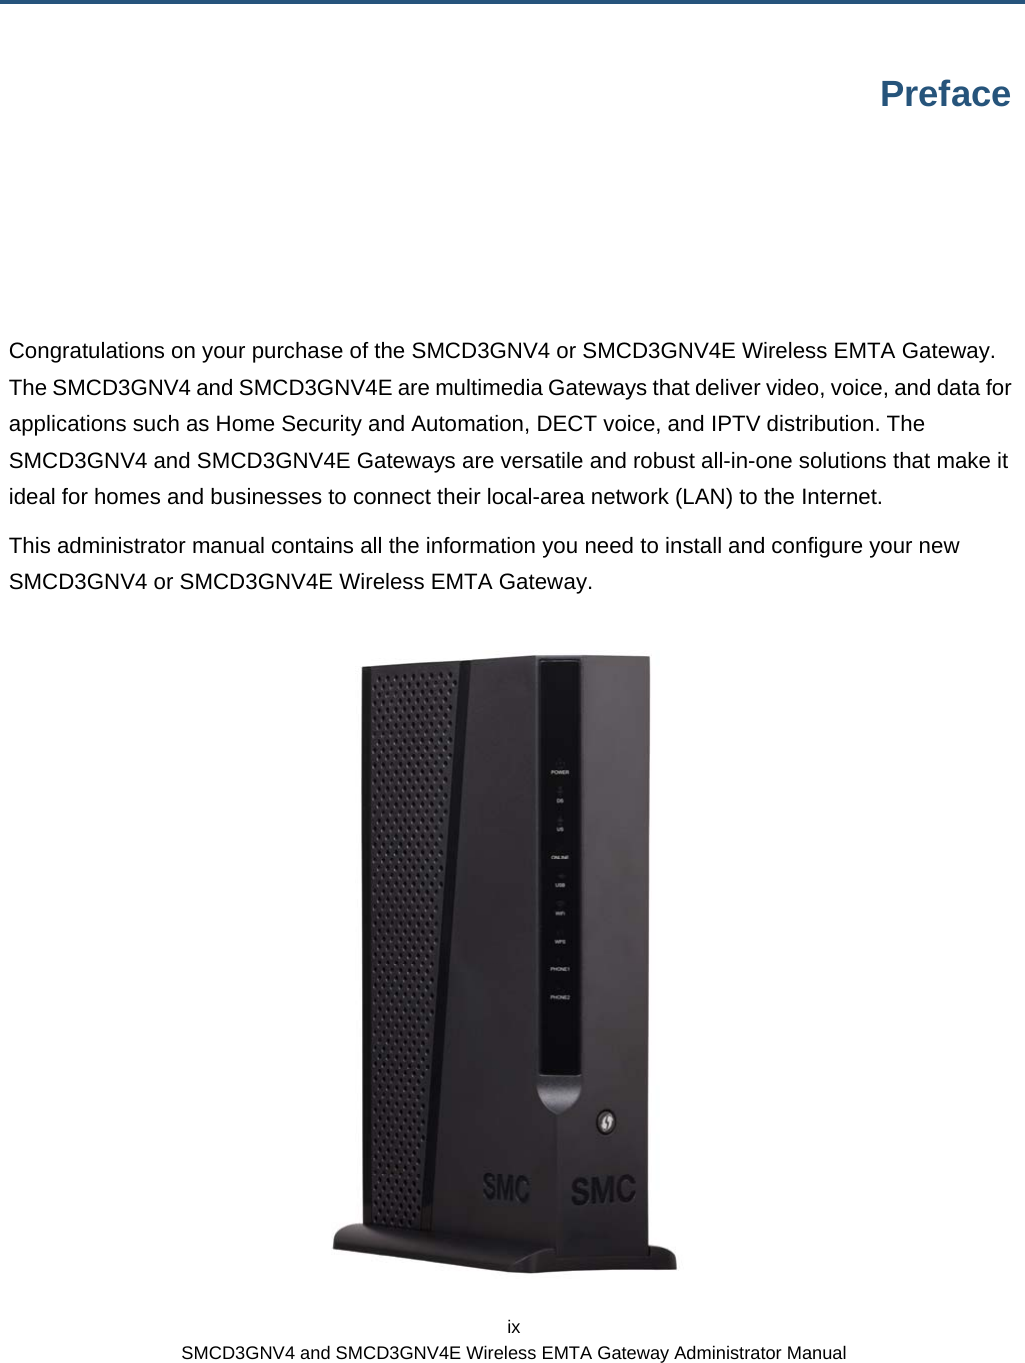  ix SMCD3GNV4 and SMCD3GNV4E Wireless EMTA Gateway Administrator Manual Preface Congratulations on your purchase of the SMCD3GNV4 or SMCD3GNV4E Wireless EMTA Gateway. The SMCD3GNV4 and SMCD3GNV4E are multimedia Gateways that deliver video, voice, and data for applications such as Home Security and Automation, DECT voice, and IPTV distribution. The SMCD3GNV4 and SMCD3GNV4E Gateways are versatile and robust all-in-one solutions that make it ideal for homes and businesses to connect their local-area network (LAN) to the Internet. This administrator manual contains all the information you need to install and configure your new SMCD3GNV4 or SMCD3GNV4E Wireless EMTA Gateway.  